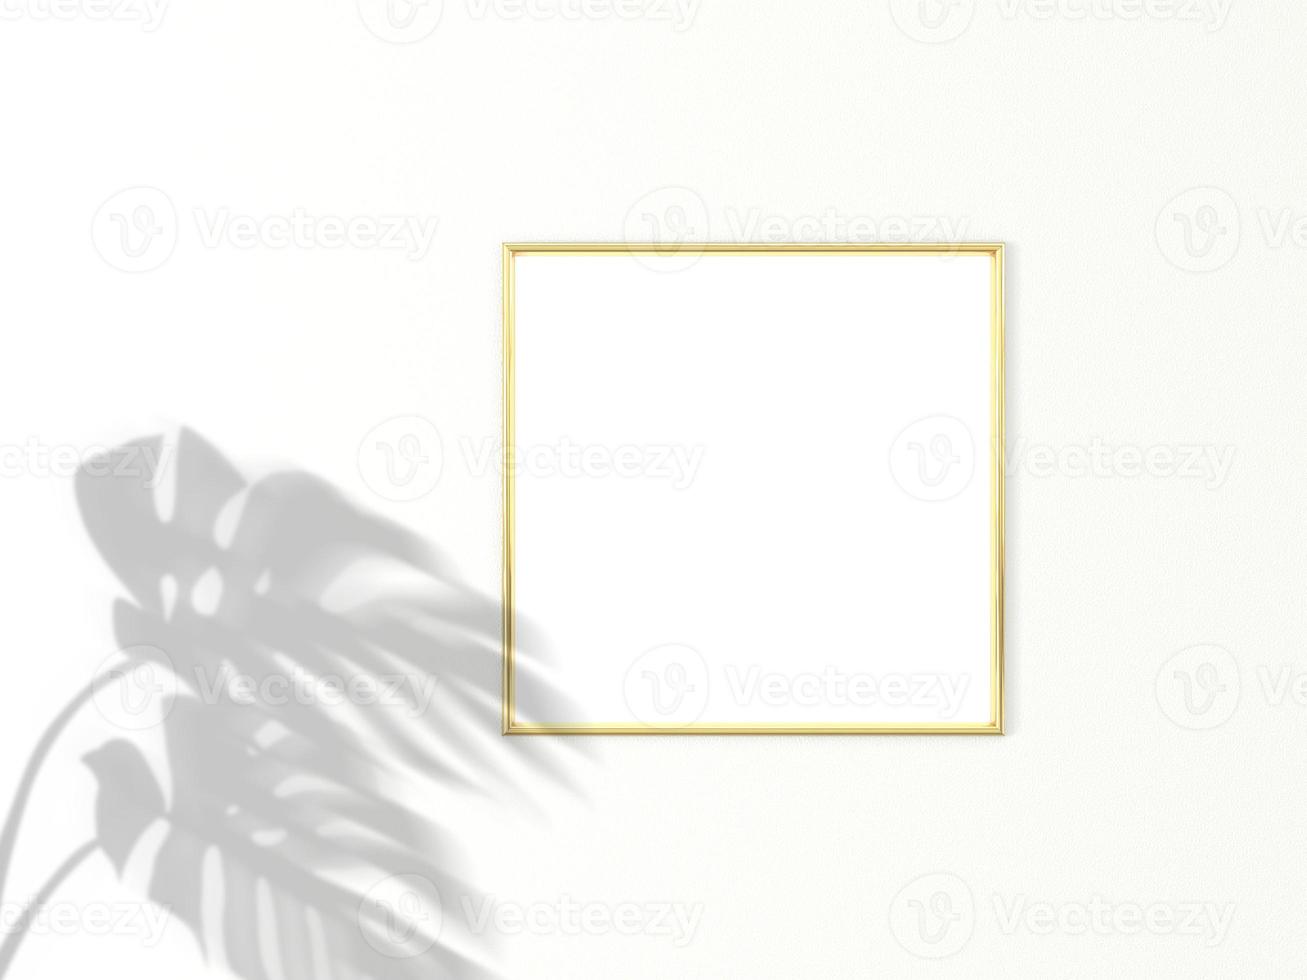 1x1 square Gold frame for photo or picture mockup on white background with shadow of monstera leaves. 3D rendering.